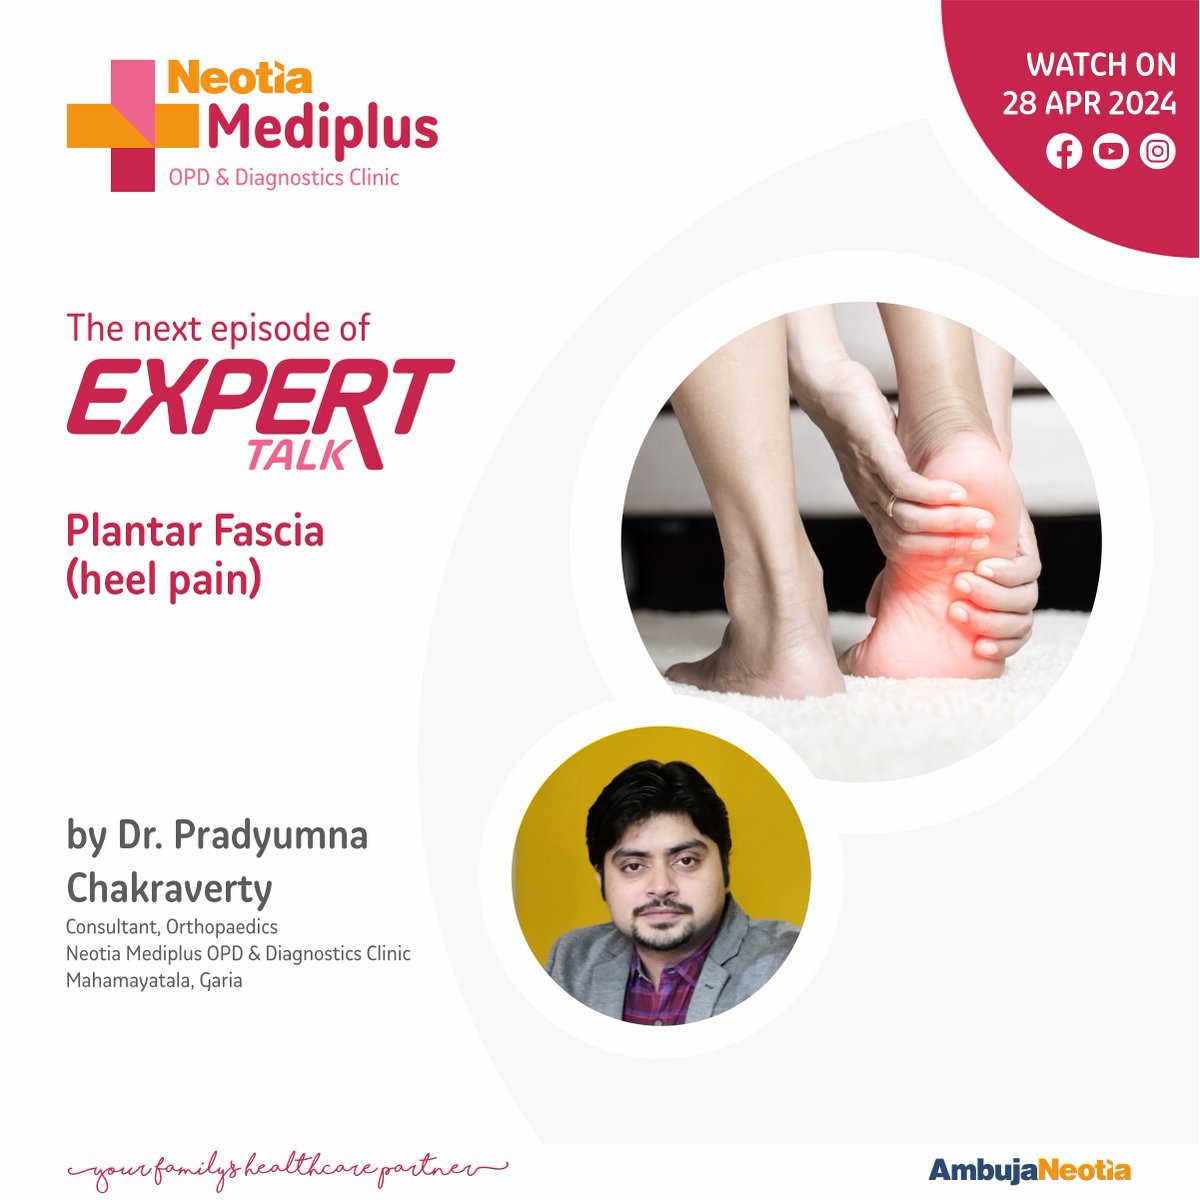 Step into a pain-free life with Dr. Pradyumna Chakraverty's expert talk on Plantar Fascia (heel pain) at Neotia Mediplus OPD & Diagnostics Clinic! Learn about symptoms, solutions and get personalized advice. Don't miss it! #PlantarFascia #HeelPain #ExpertTalk #Orthopaedics